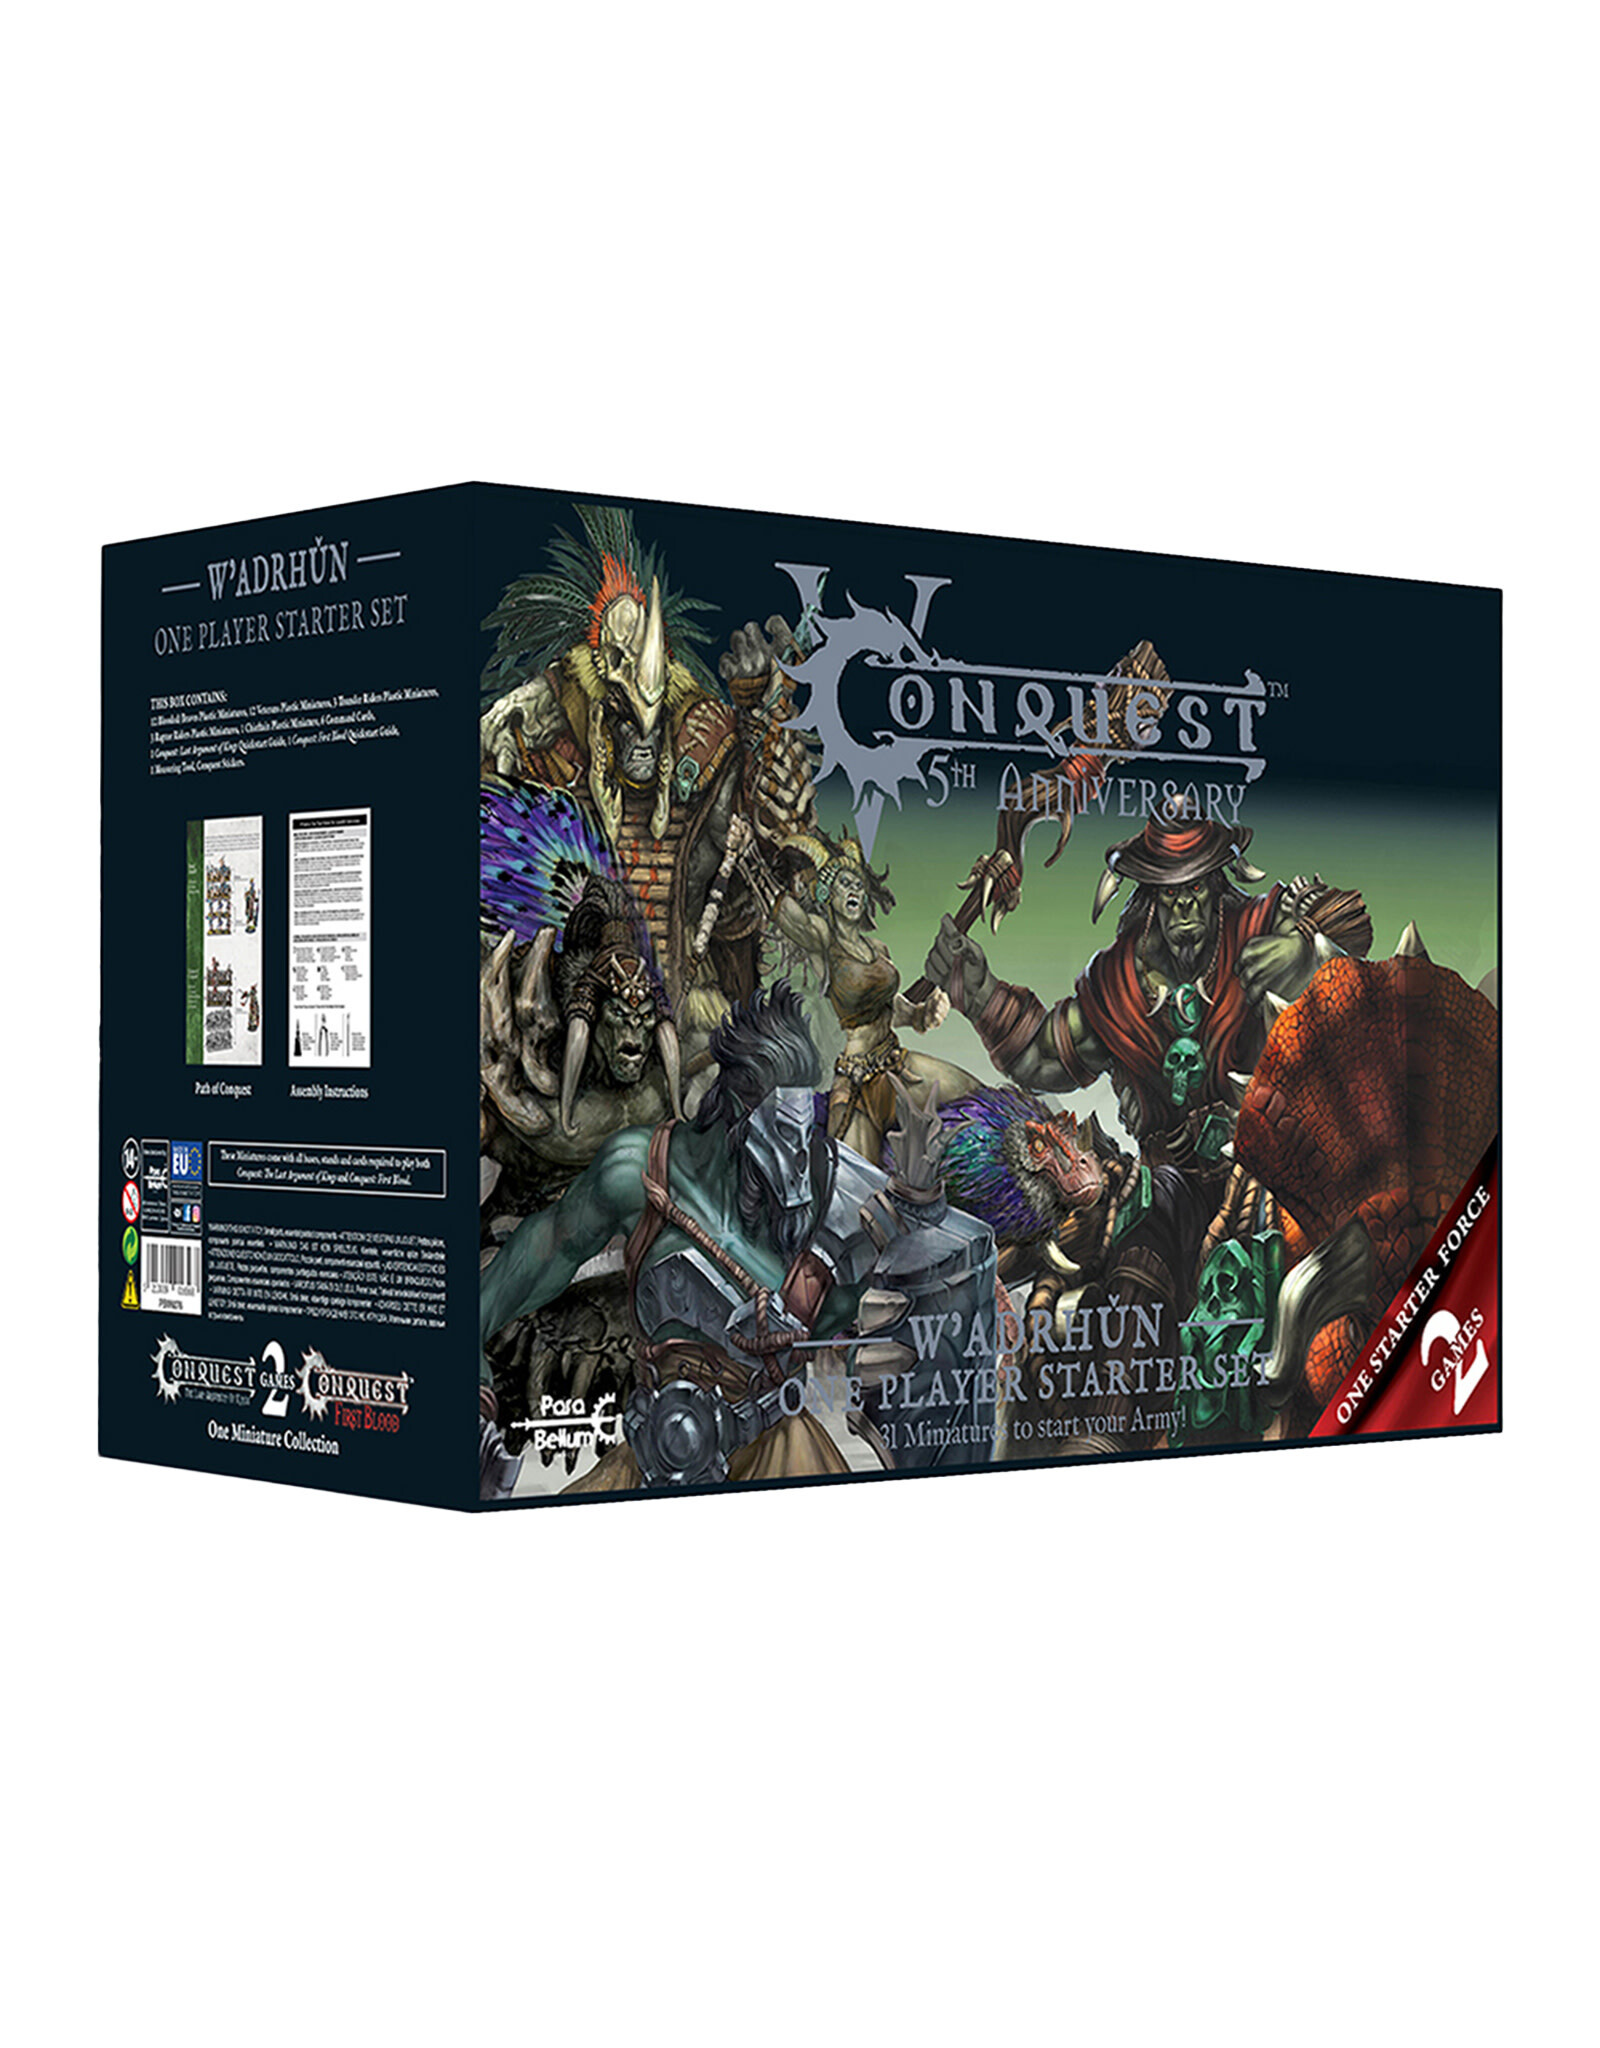 Conquest Conquest W’adrhŭn - 5th Anniversary Supercharged Starter Set